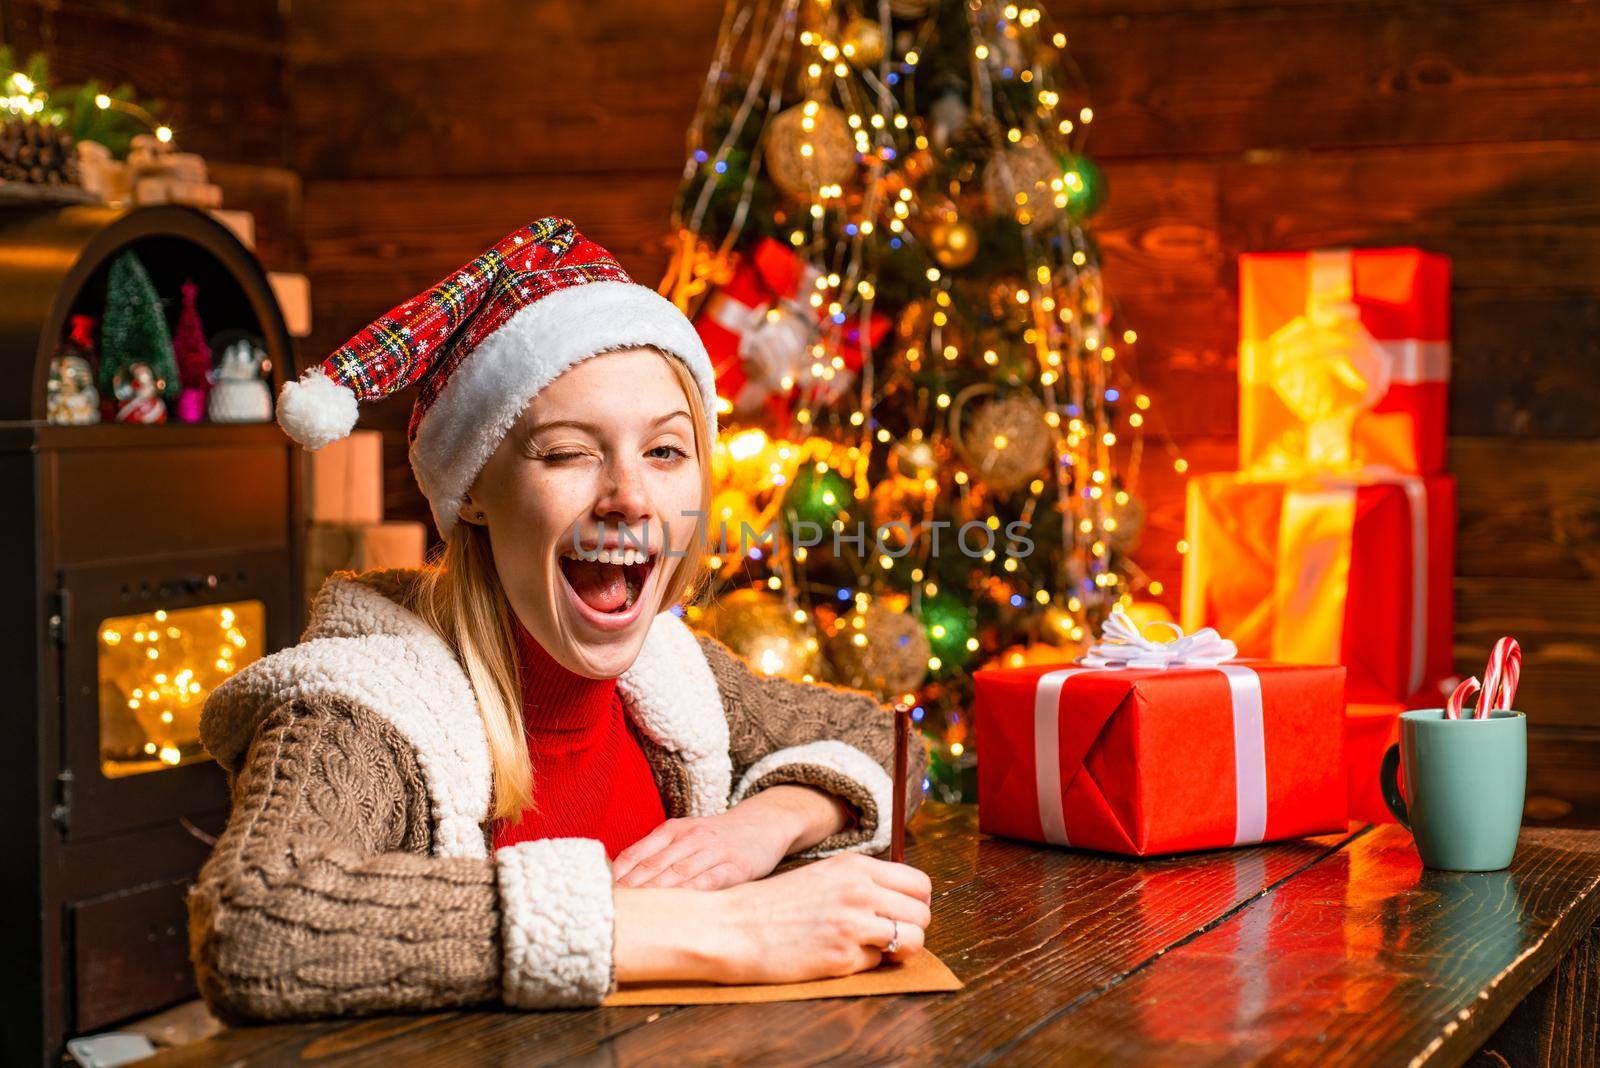 Eye winking blonde beautiful woman in Santa's hat at winter holiday background. Merry christmas and happy new year. It is miracle. Concept of winter holidays and good time